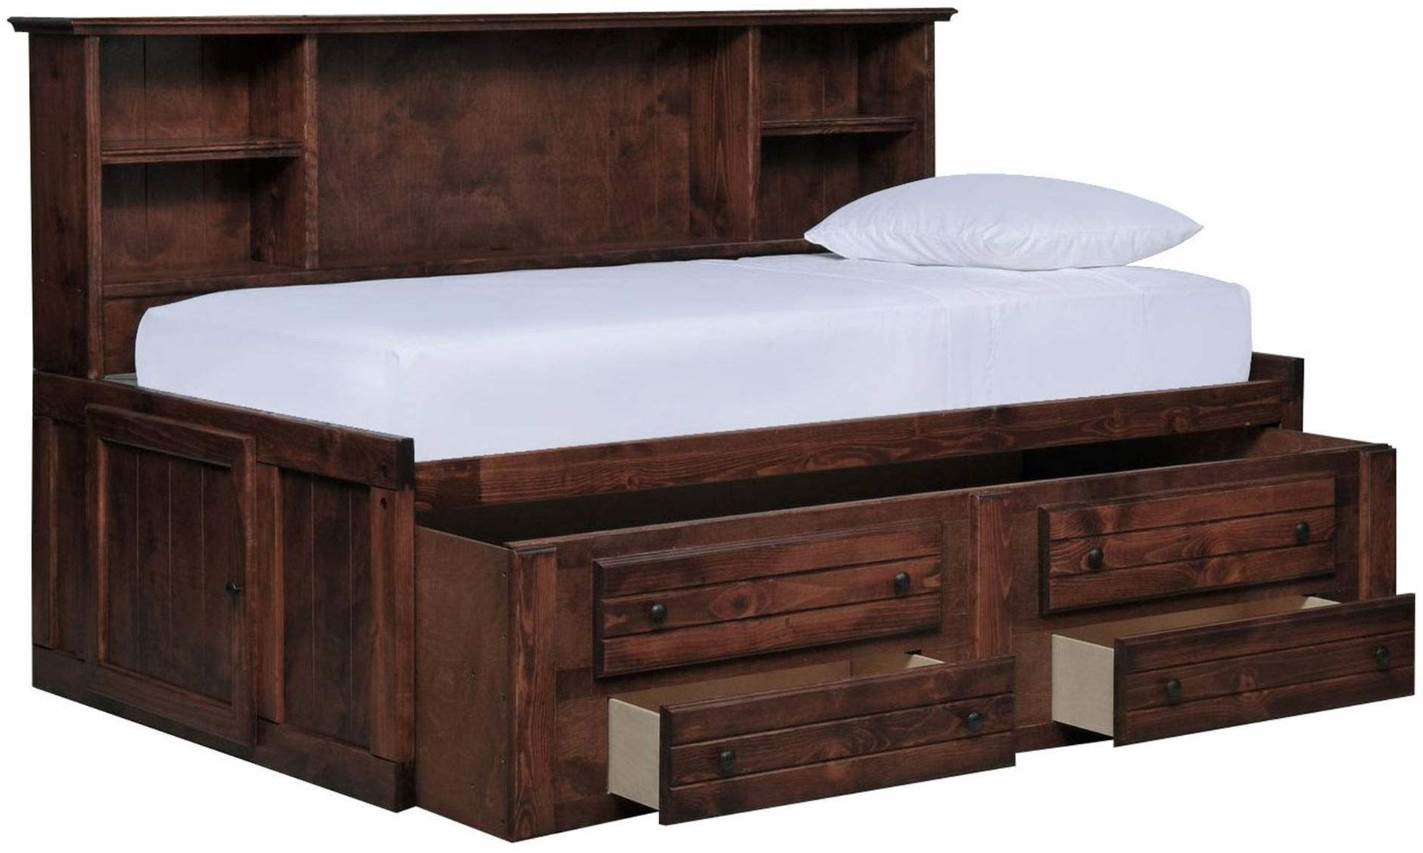 Trendwood Inc. Sedona Cheyenne Cocoa Full Youth Bed with Underdresser